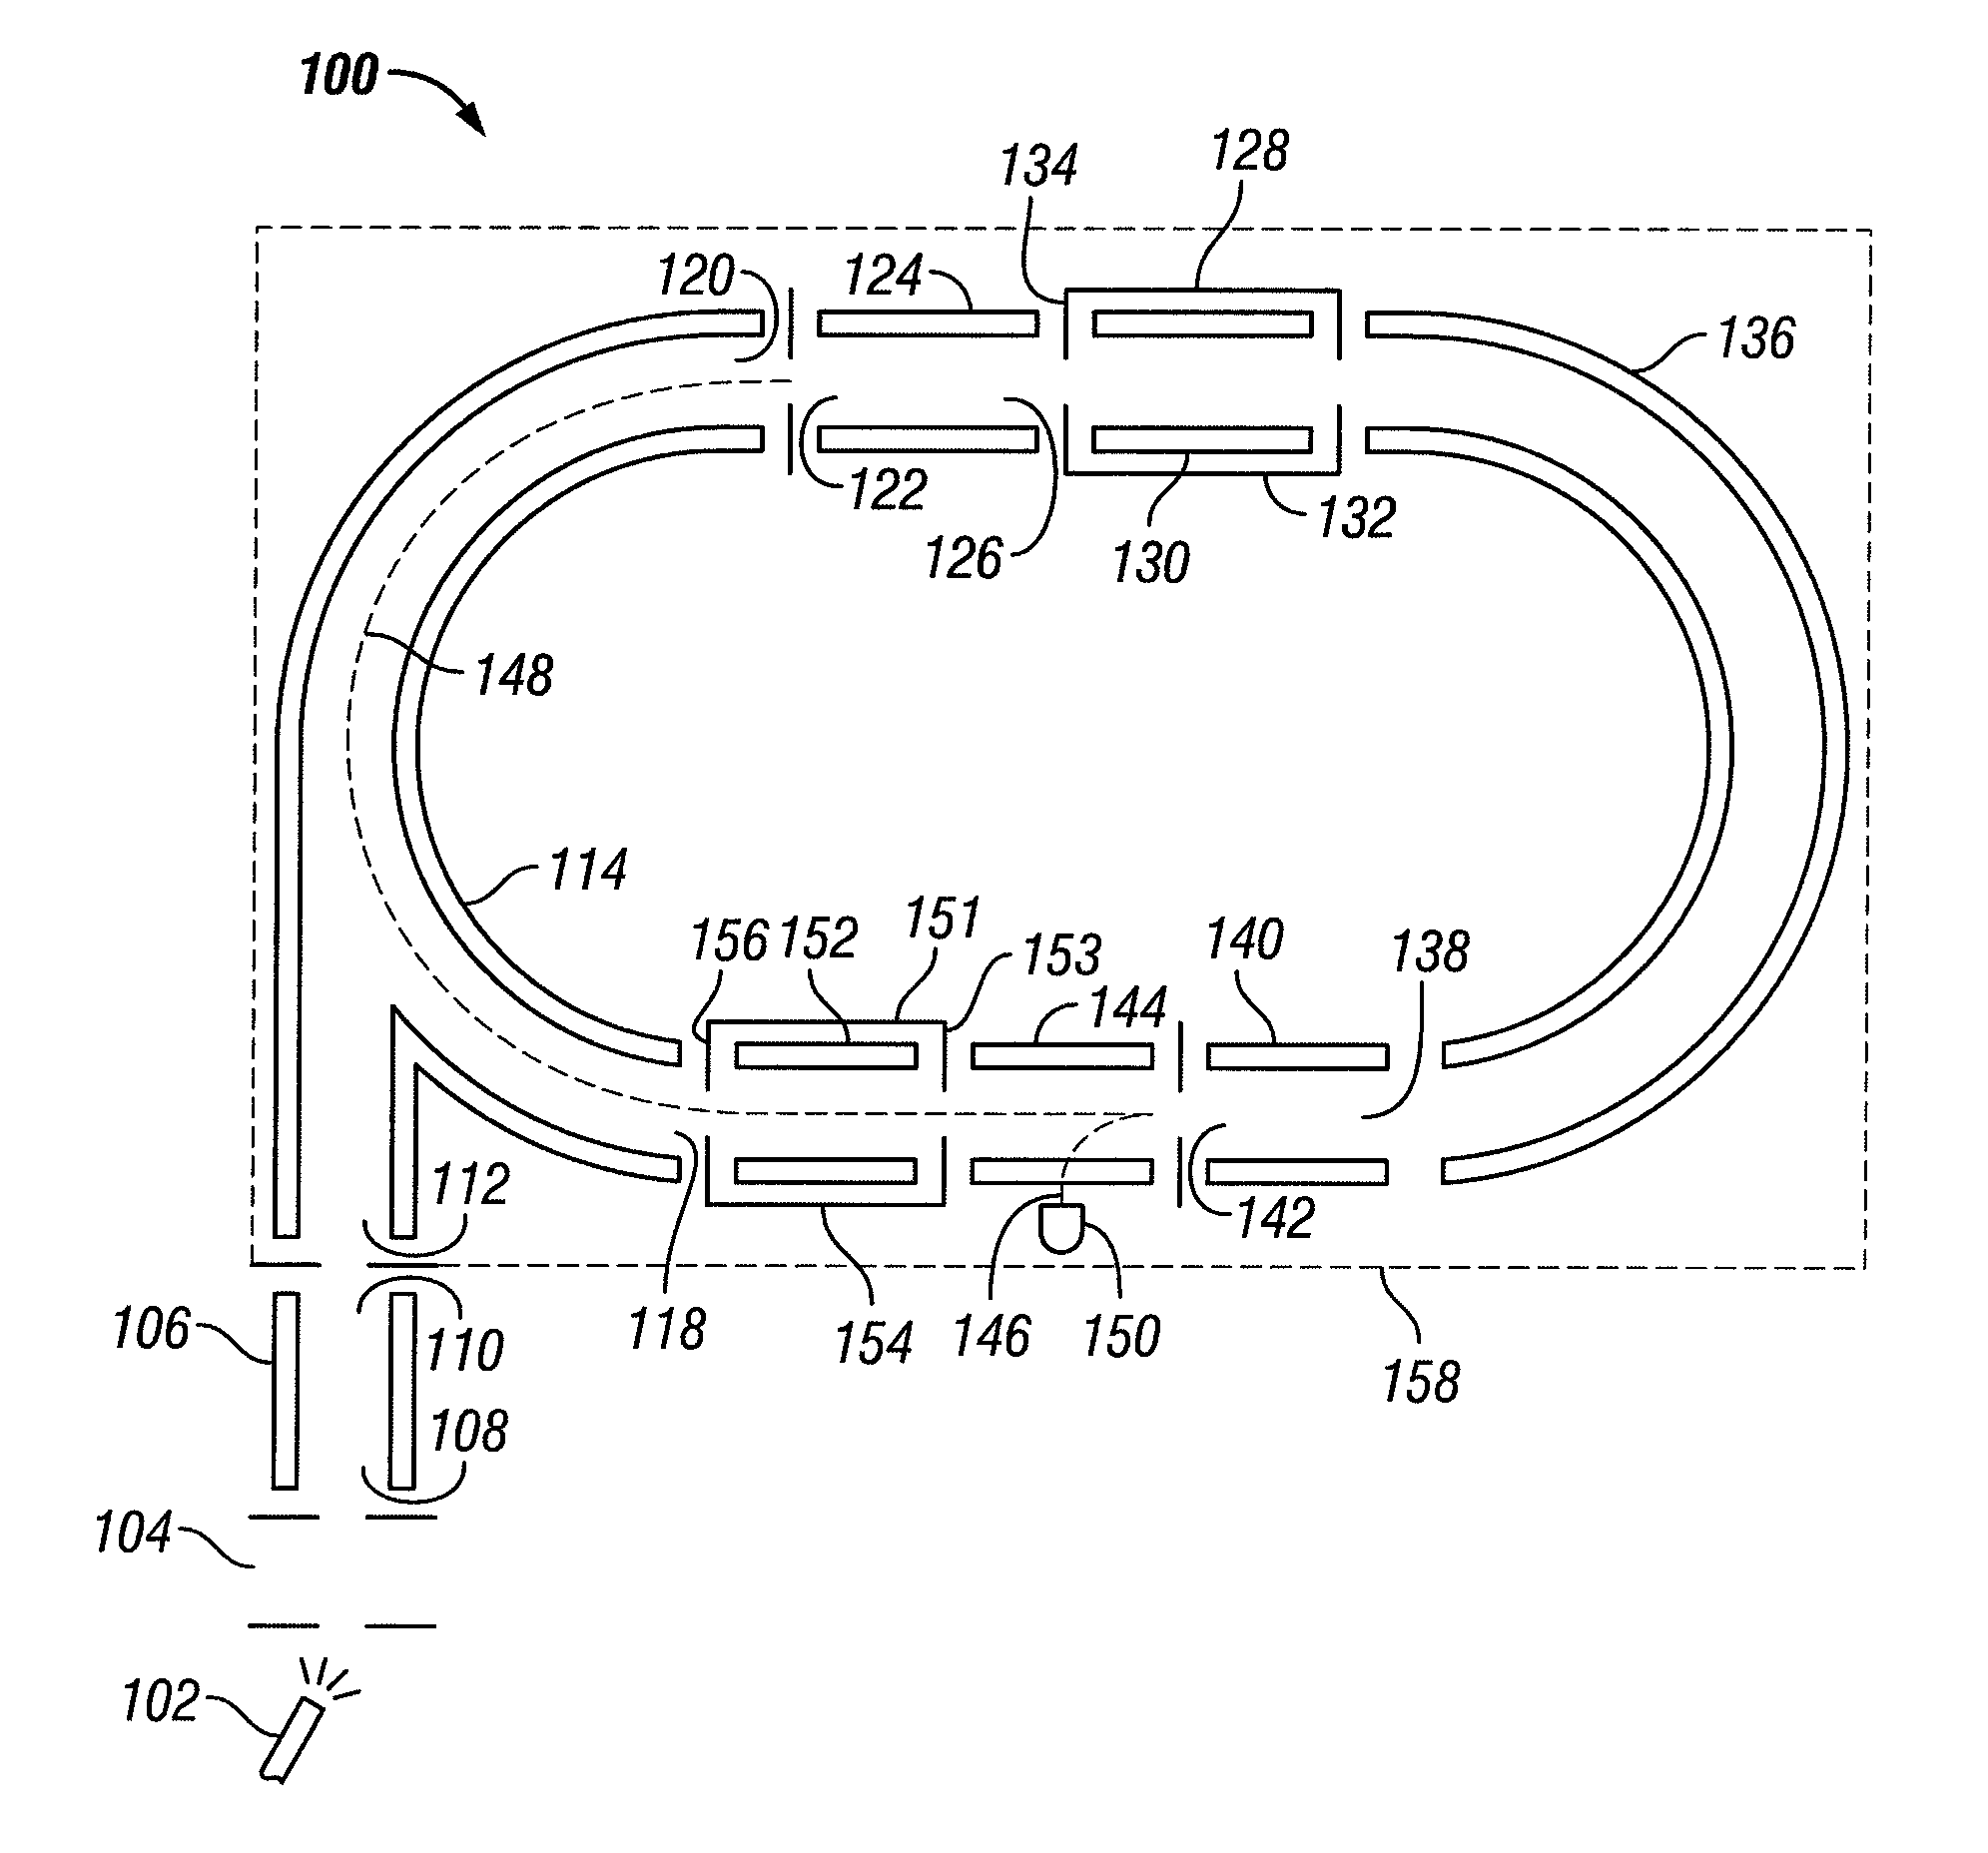 Mass spectrometer with looped ion path